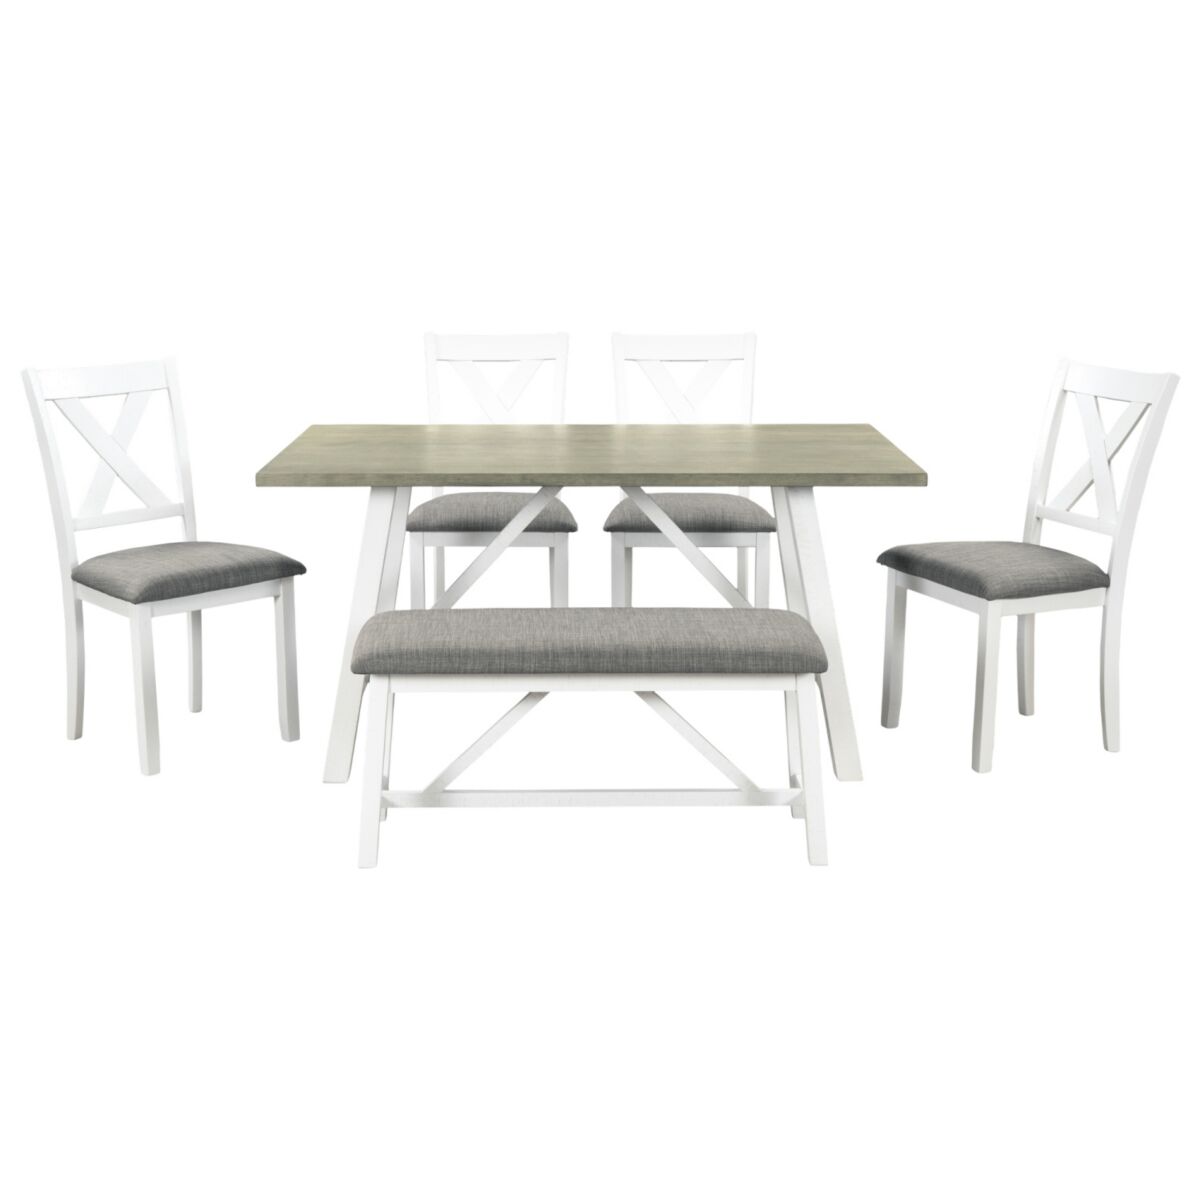 Simplie Fun 6 Piece Dining Table Set Wood Dining Table and chair Kitchen Table Set with Table, Bench and 4 Chairs, Rustic Style, White+Gray - White